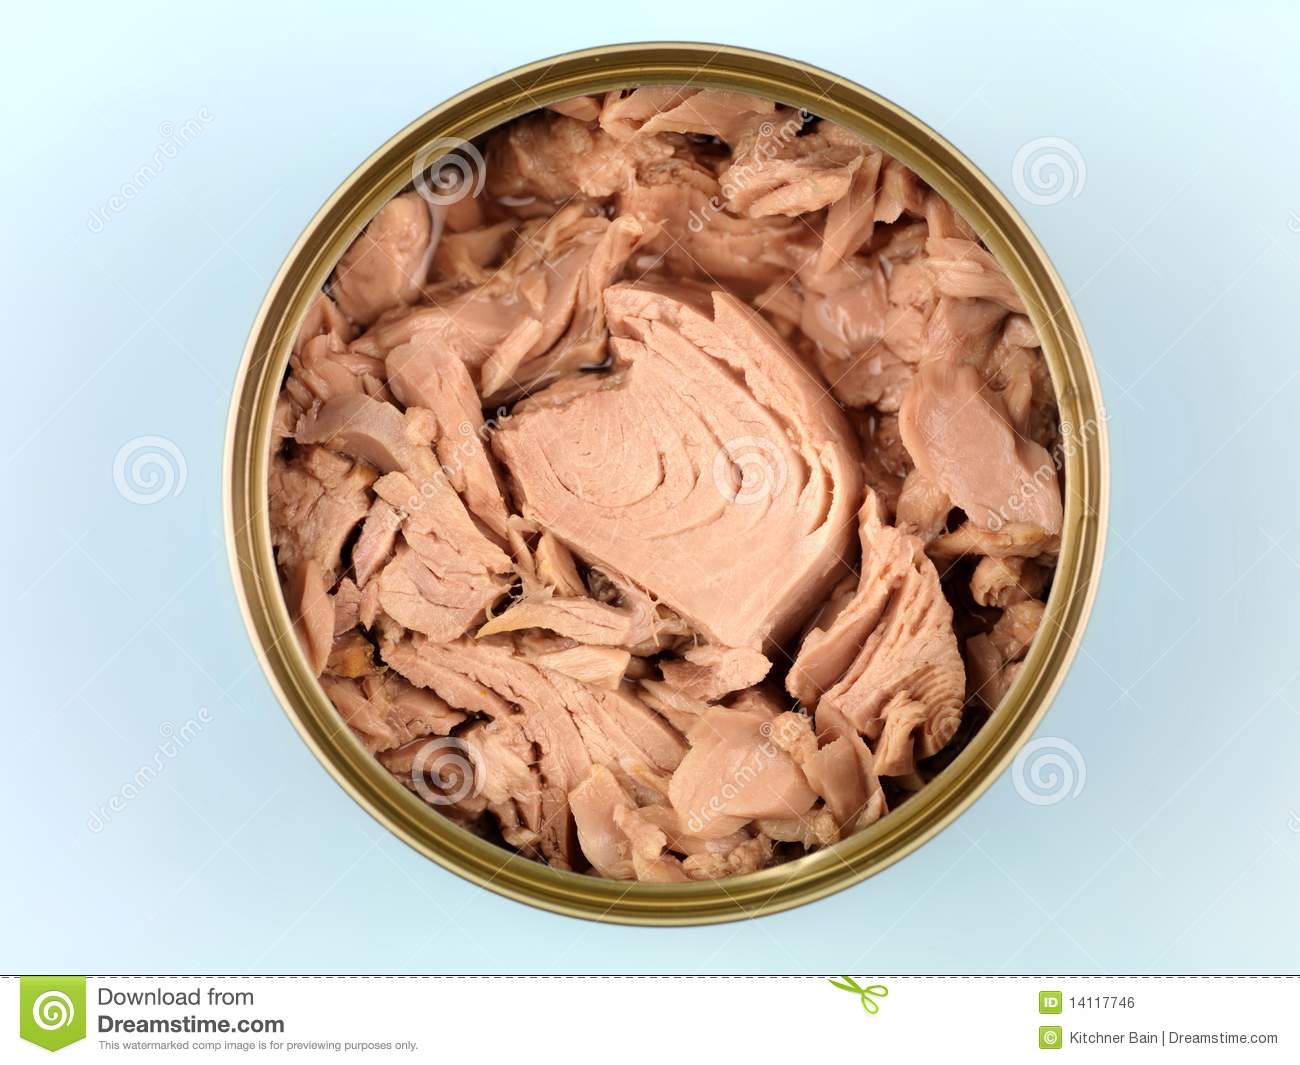 Canned Tuna Royalty Free Stock Image   Image  14117746